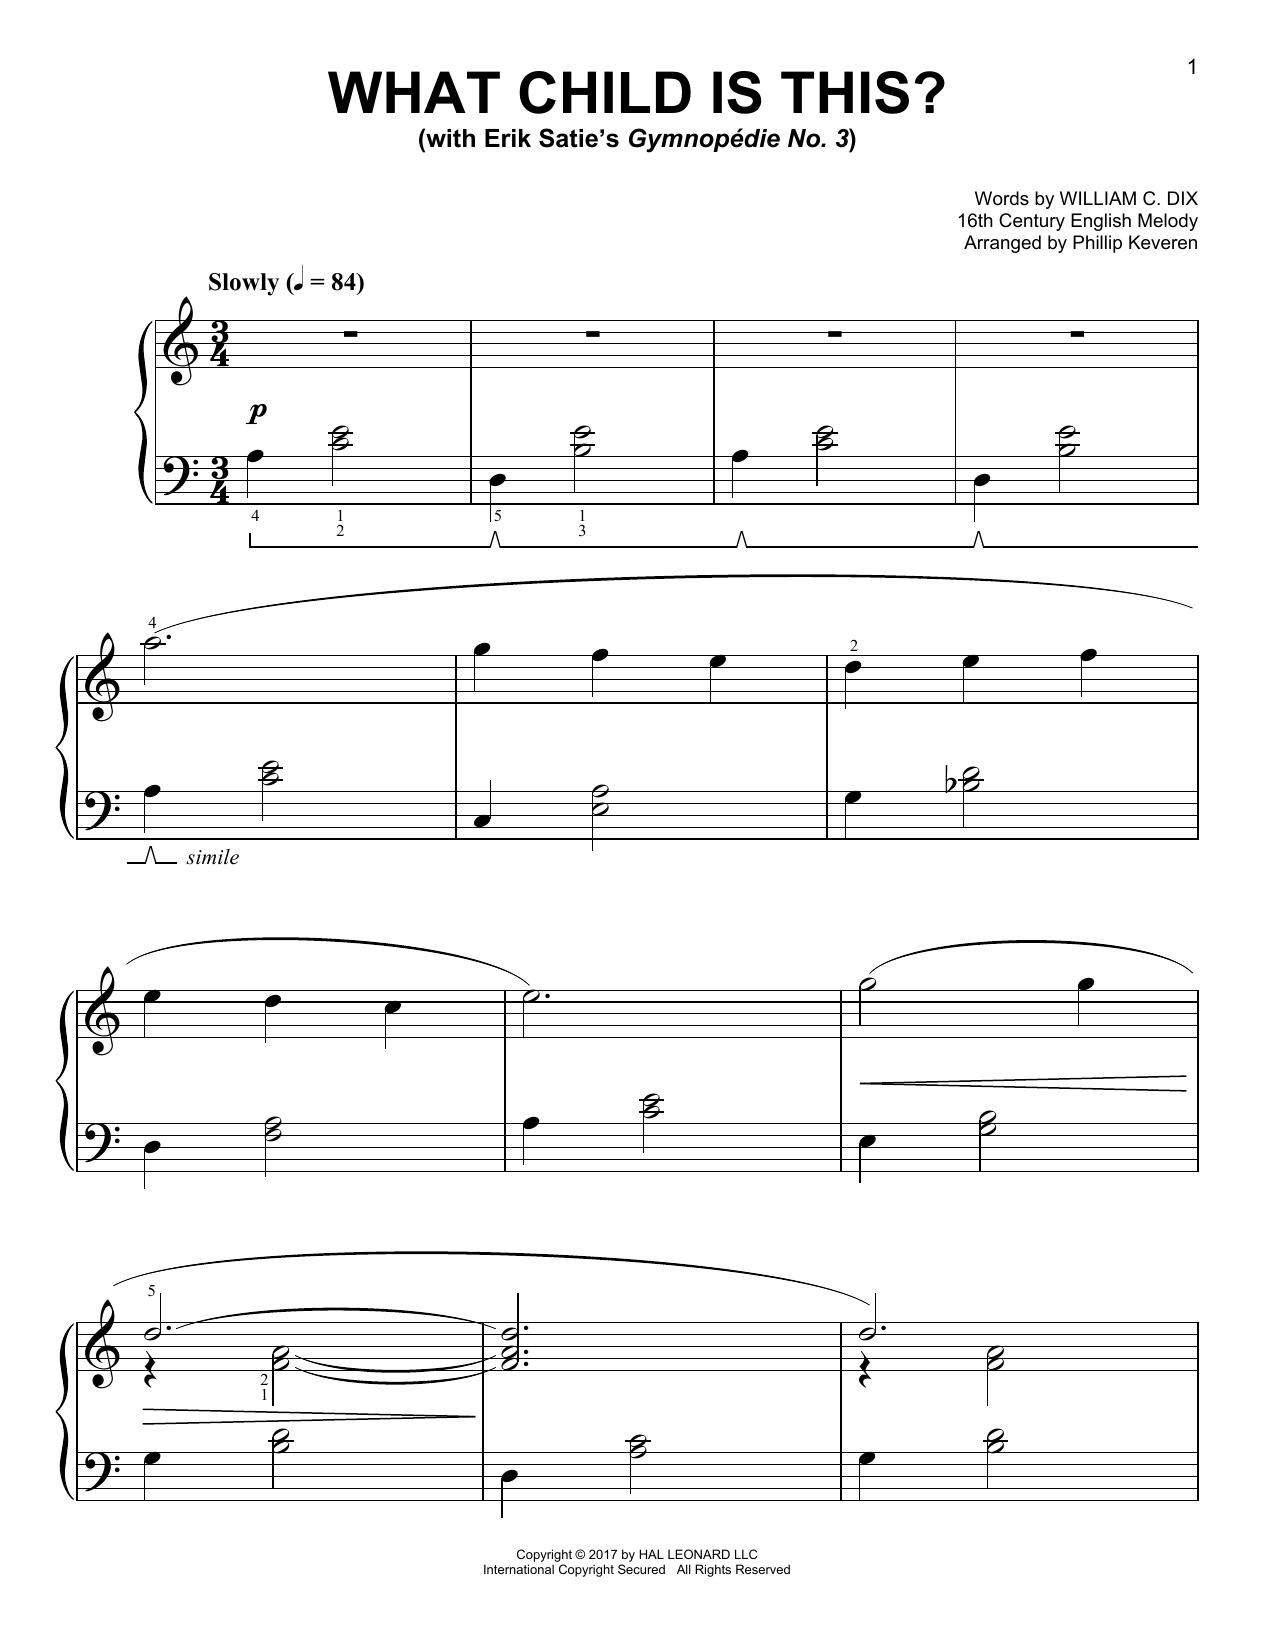 Download 16th Century English Melody What Child Is This? [Classical version] Sheet Music